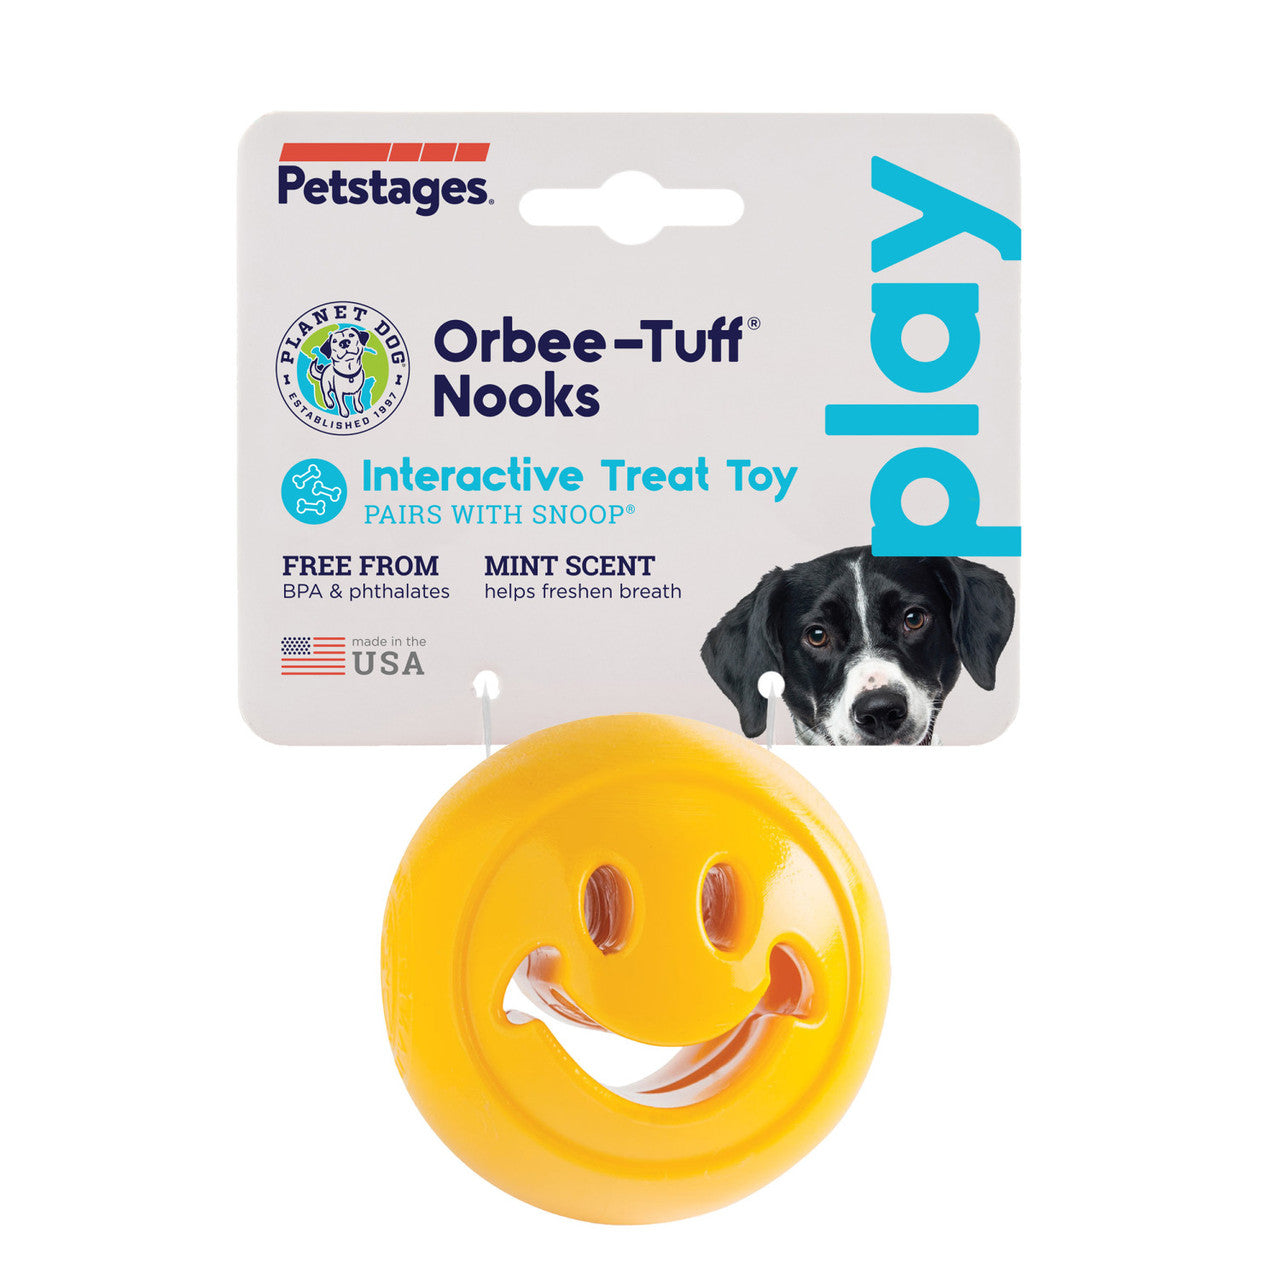 Nook ball is made from the award-winning Orbee-Tuff material, which is 100% recyclable and non-toxic. Ball is durable, bouncy, buoyant, and perfect for tossing, fetching, and bouncing. Stuff with tiny treat bites, nut butter, or cheese.